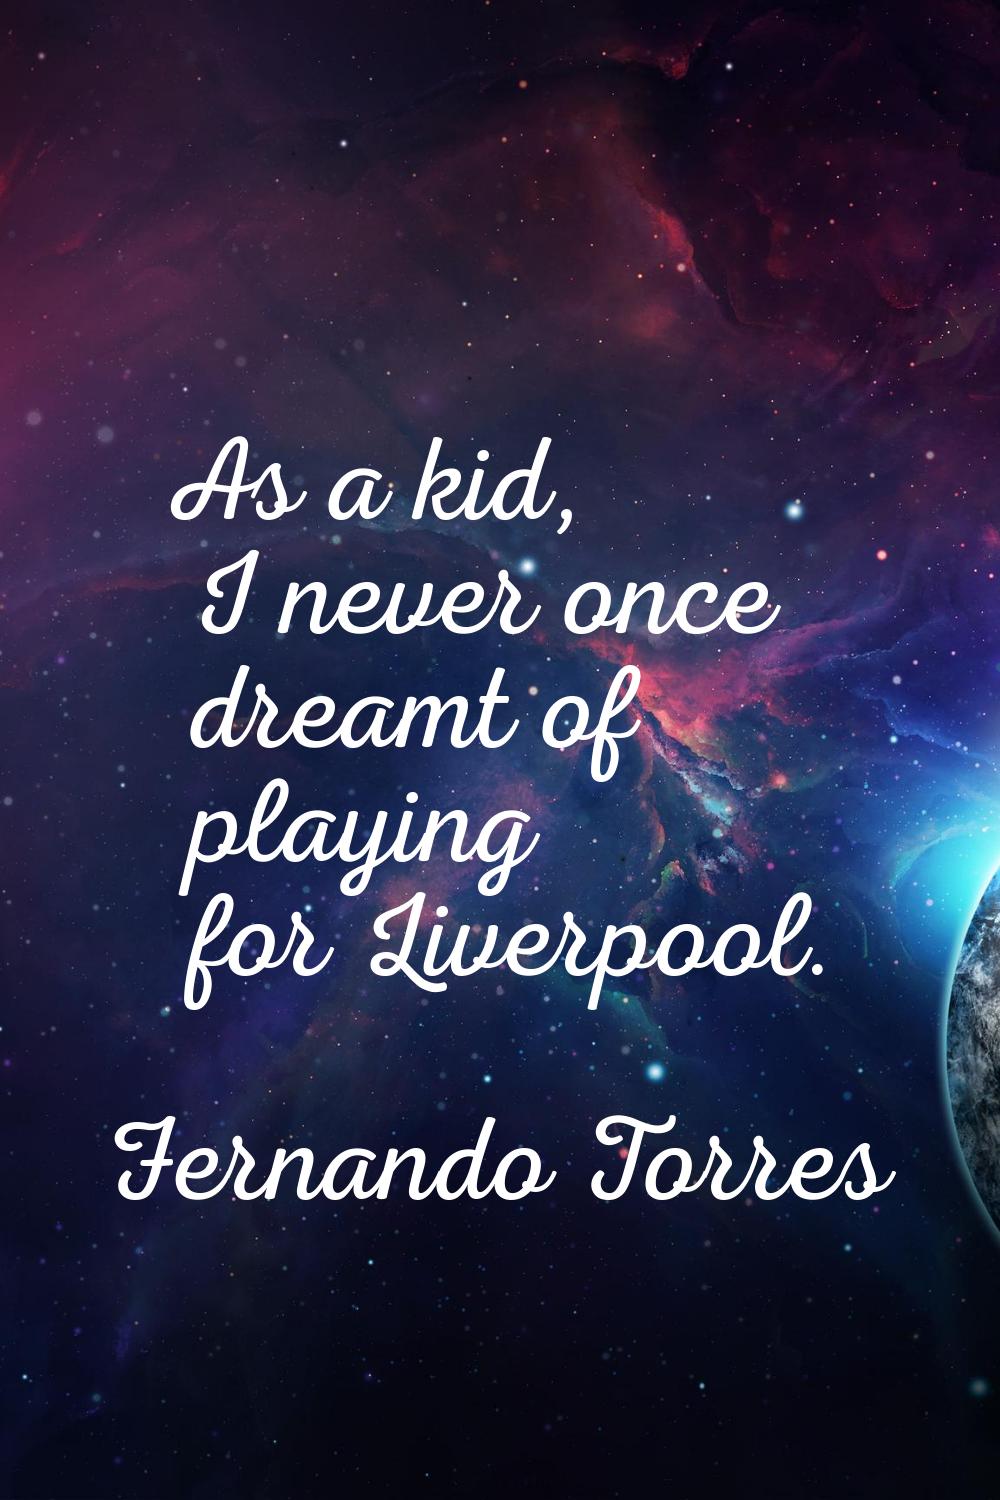 As a kid, I never once dreamt of playing for Liverpool.